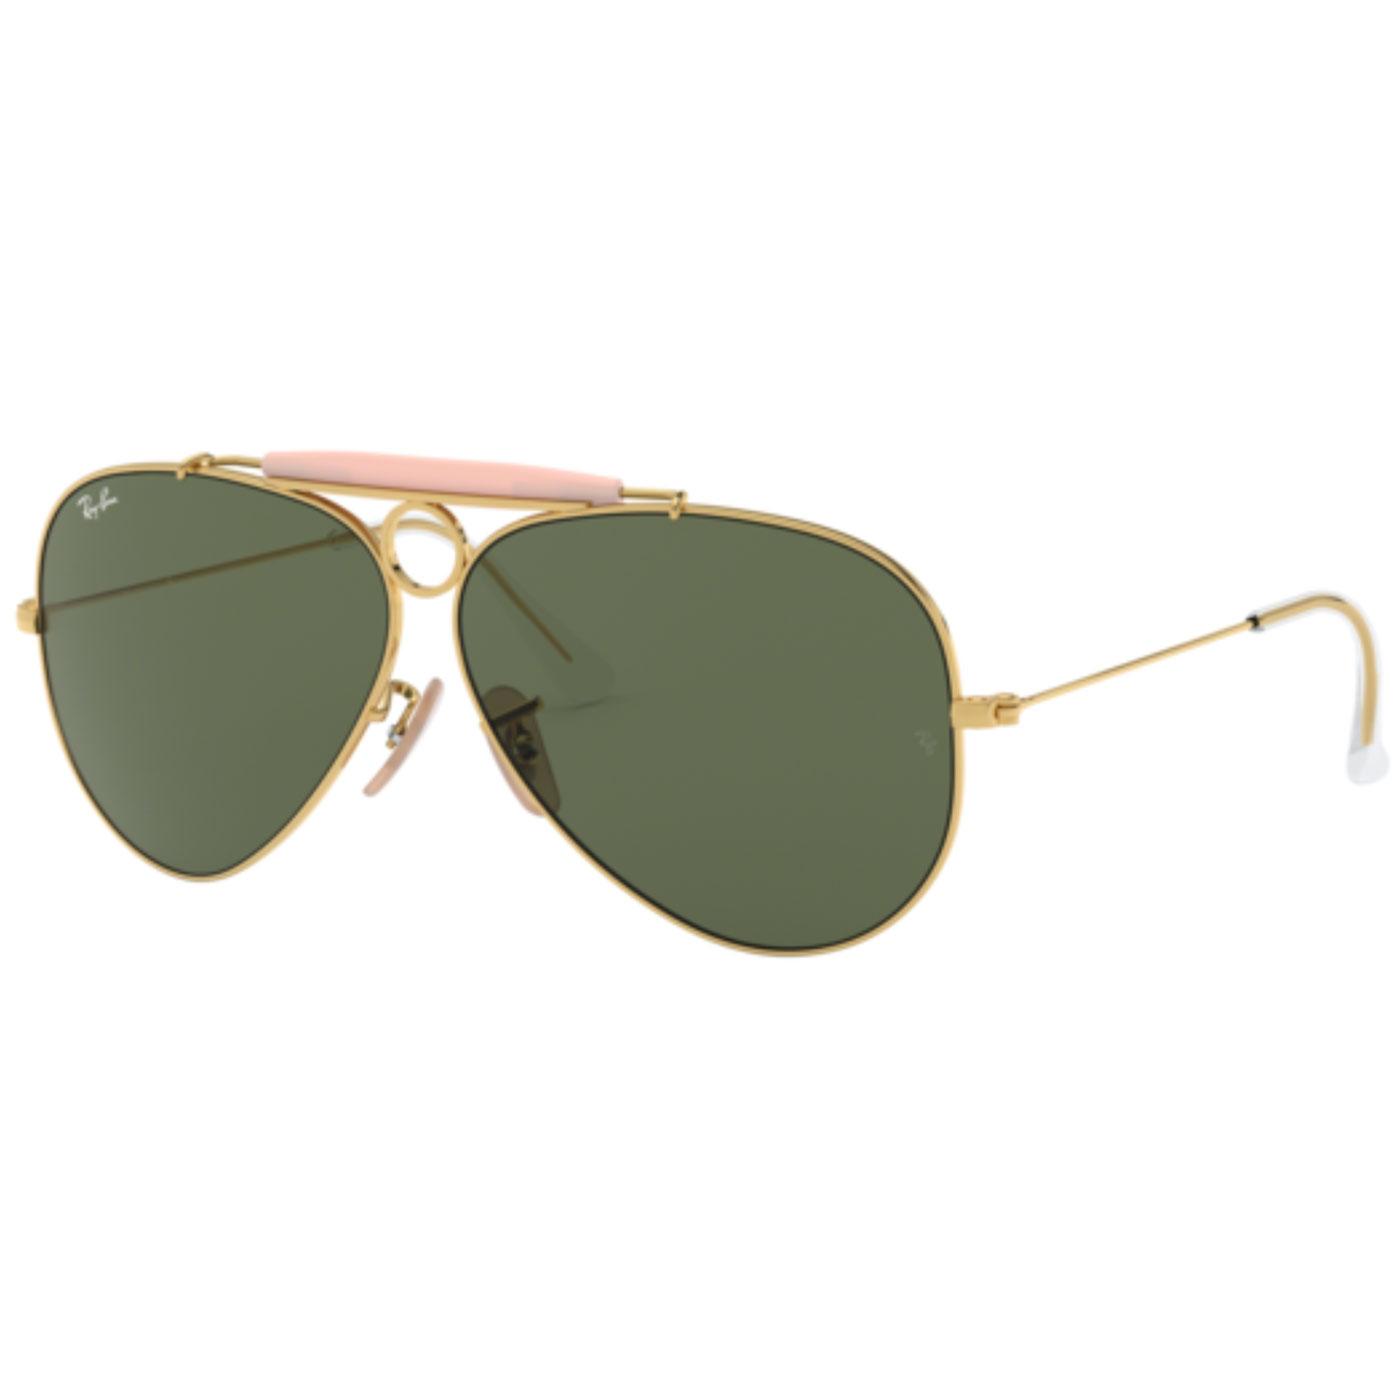 Shooter Sunglasses | RAY-BAN Retro 60s Mod Shooter Indie Sunglasses